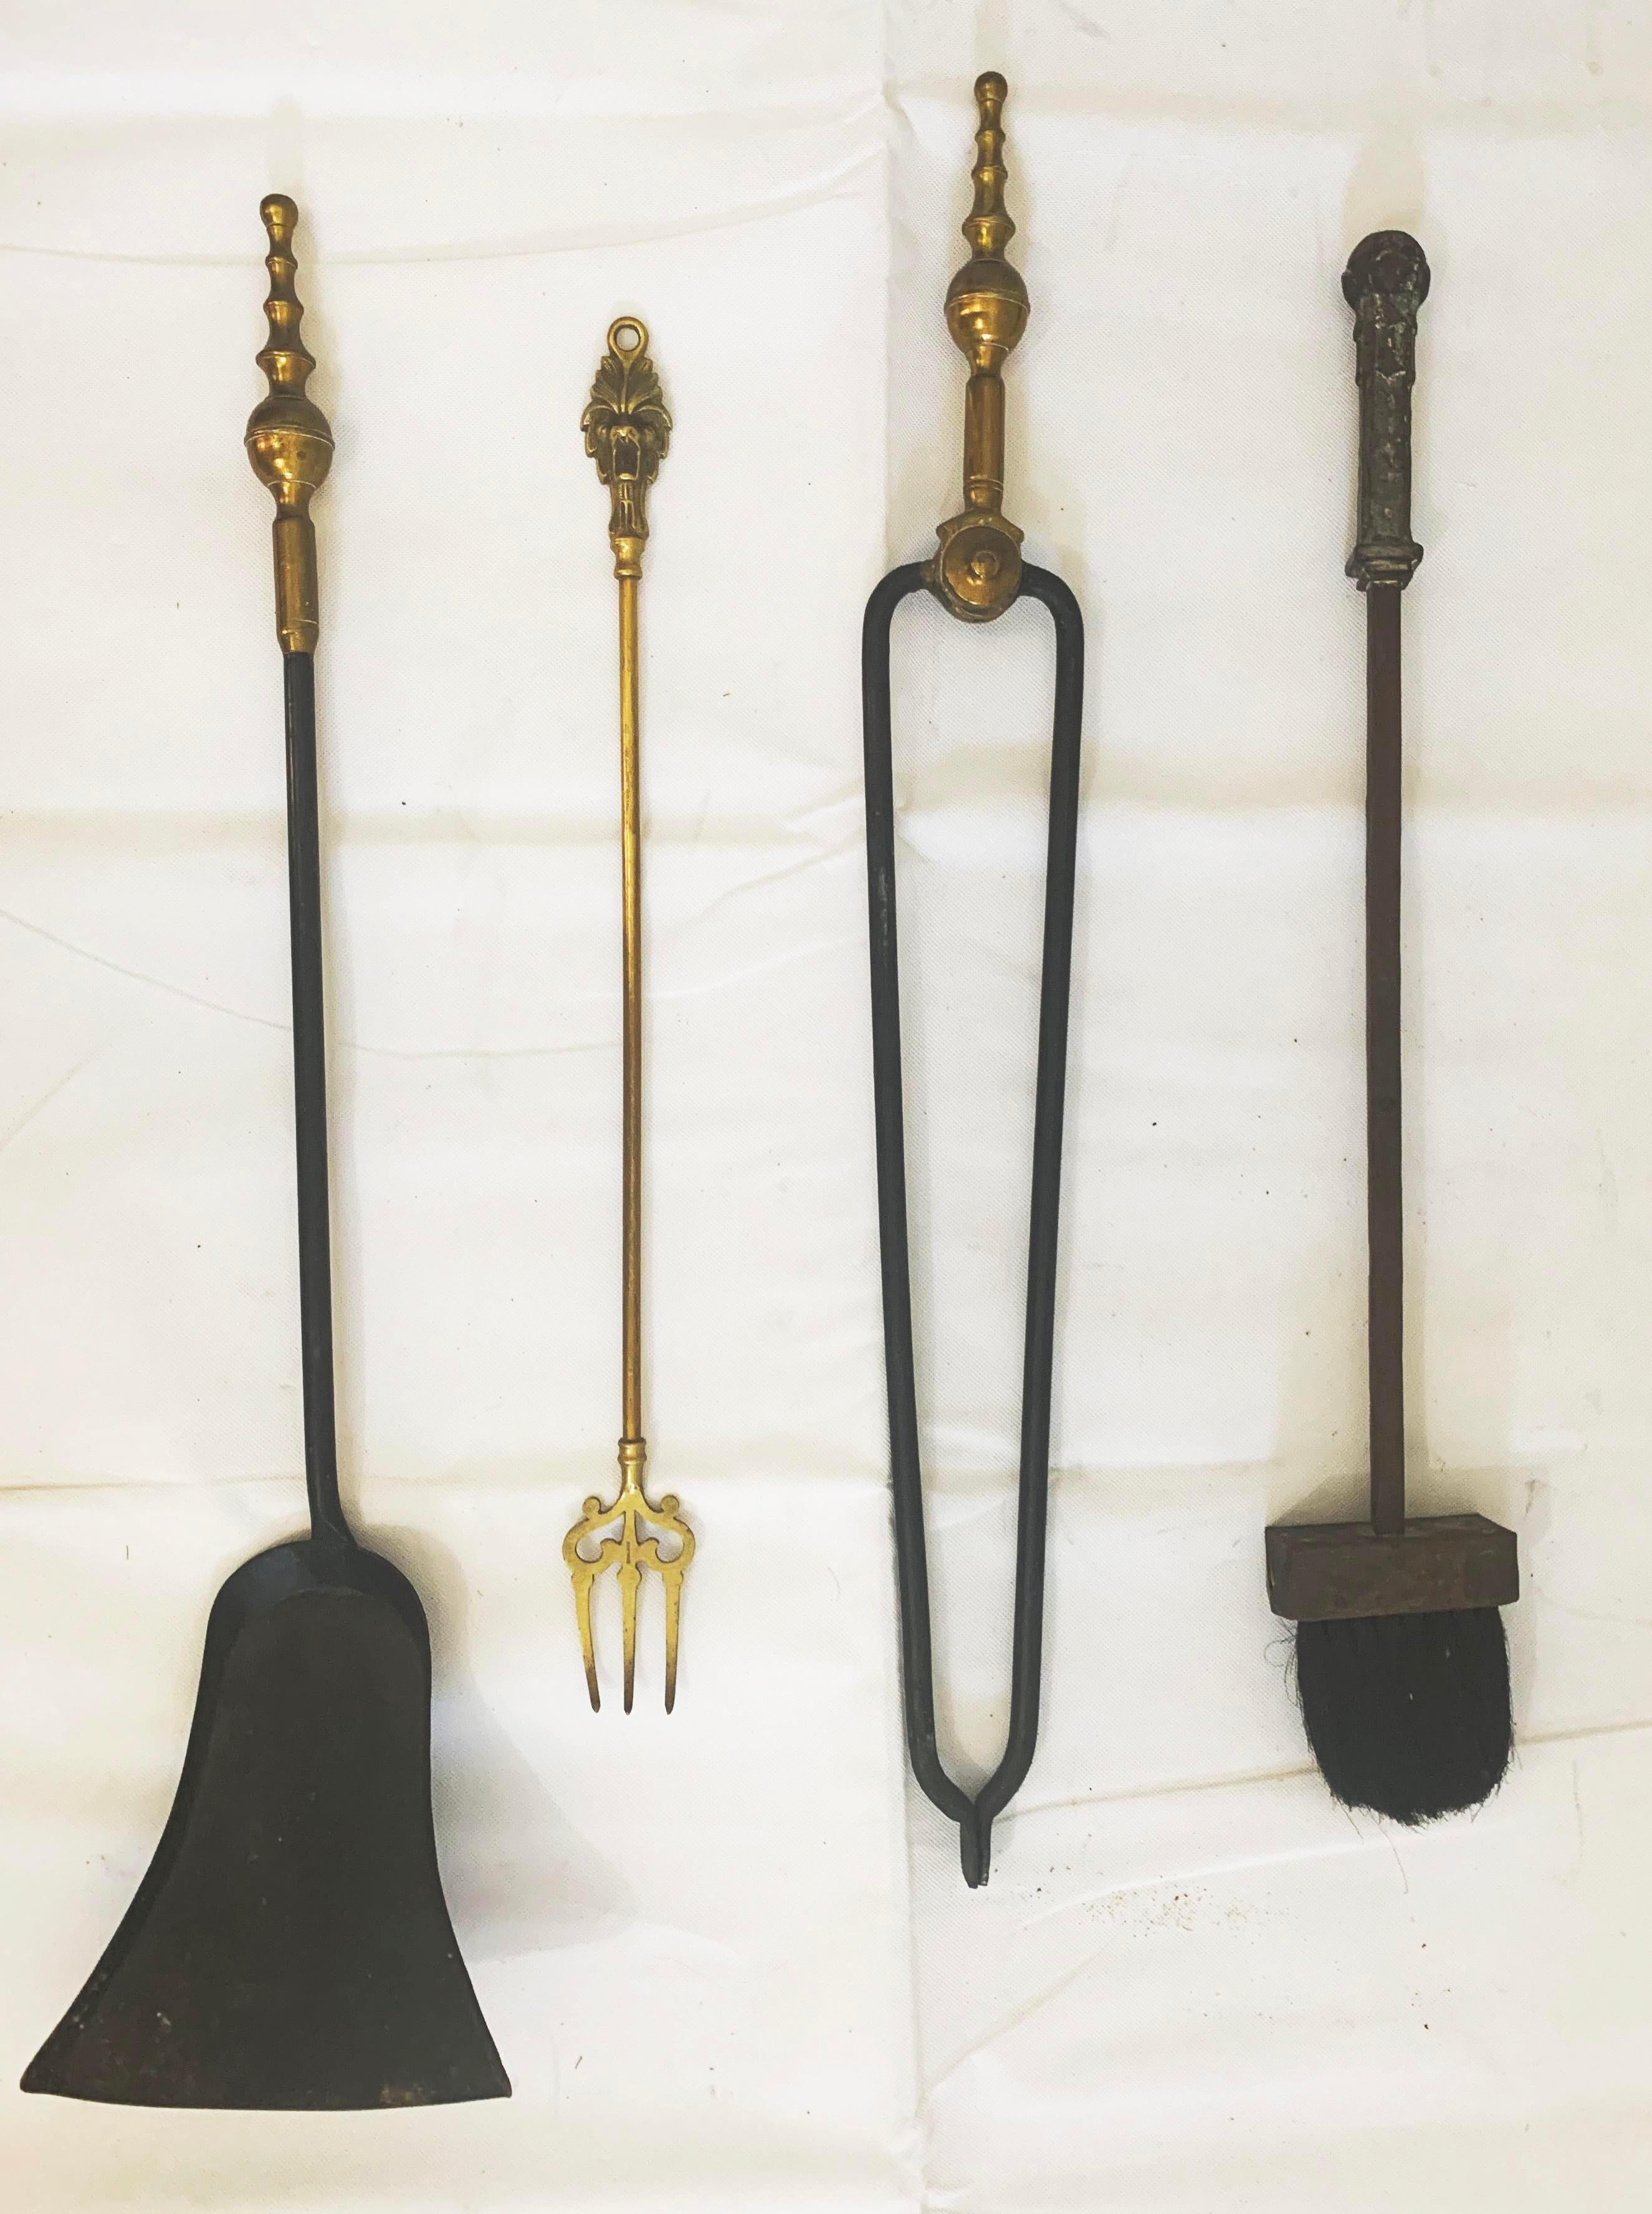 Exquisite set of hand made brass fireplace tools from England (late 1800s) along with hand forged iron brush from France (mid 1800s). Set includes shovel, fork, tongs, brush and stand.

Dimensions:
Shovel 
28